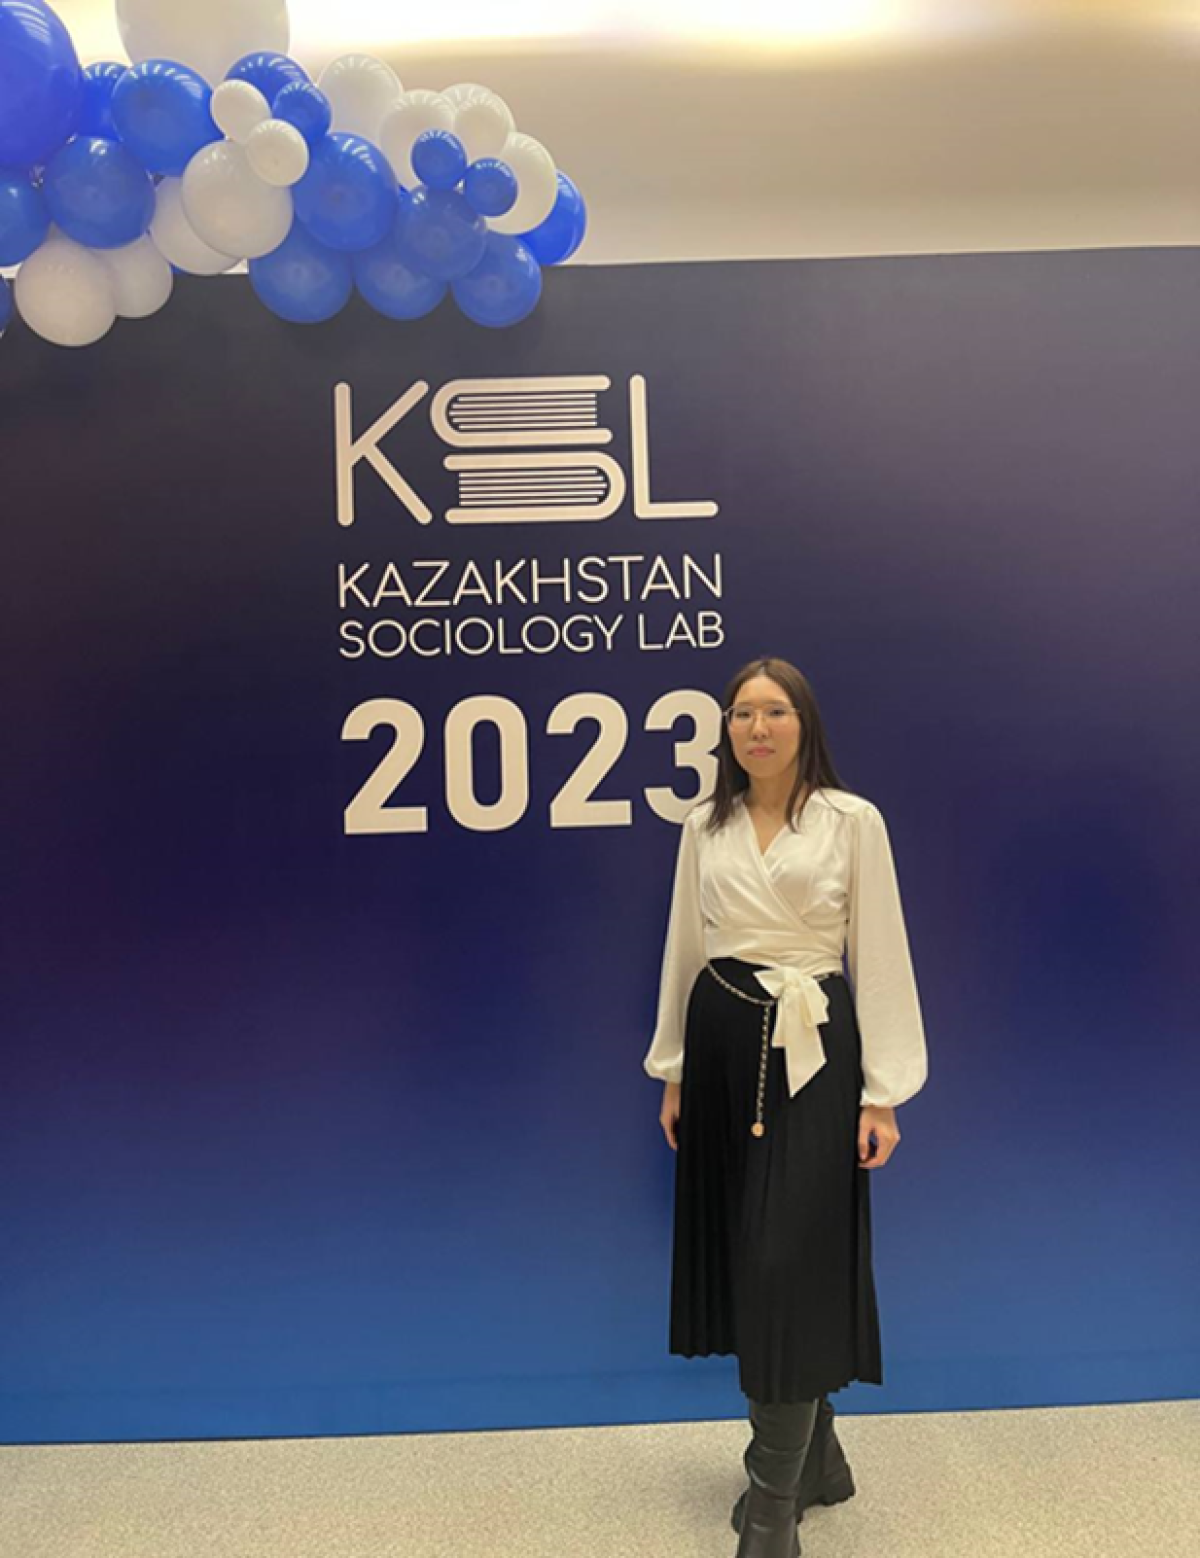 Participation in the School of Sociologists "Kazakhstan Sociology Lab"